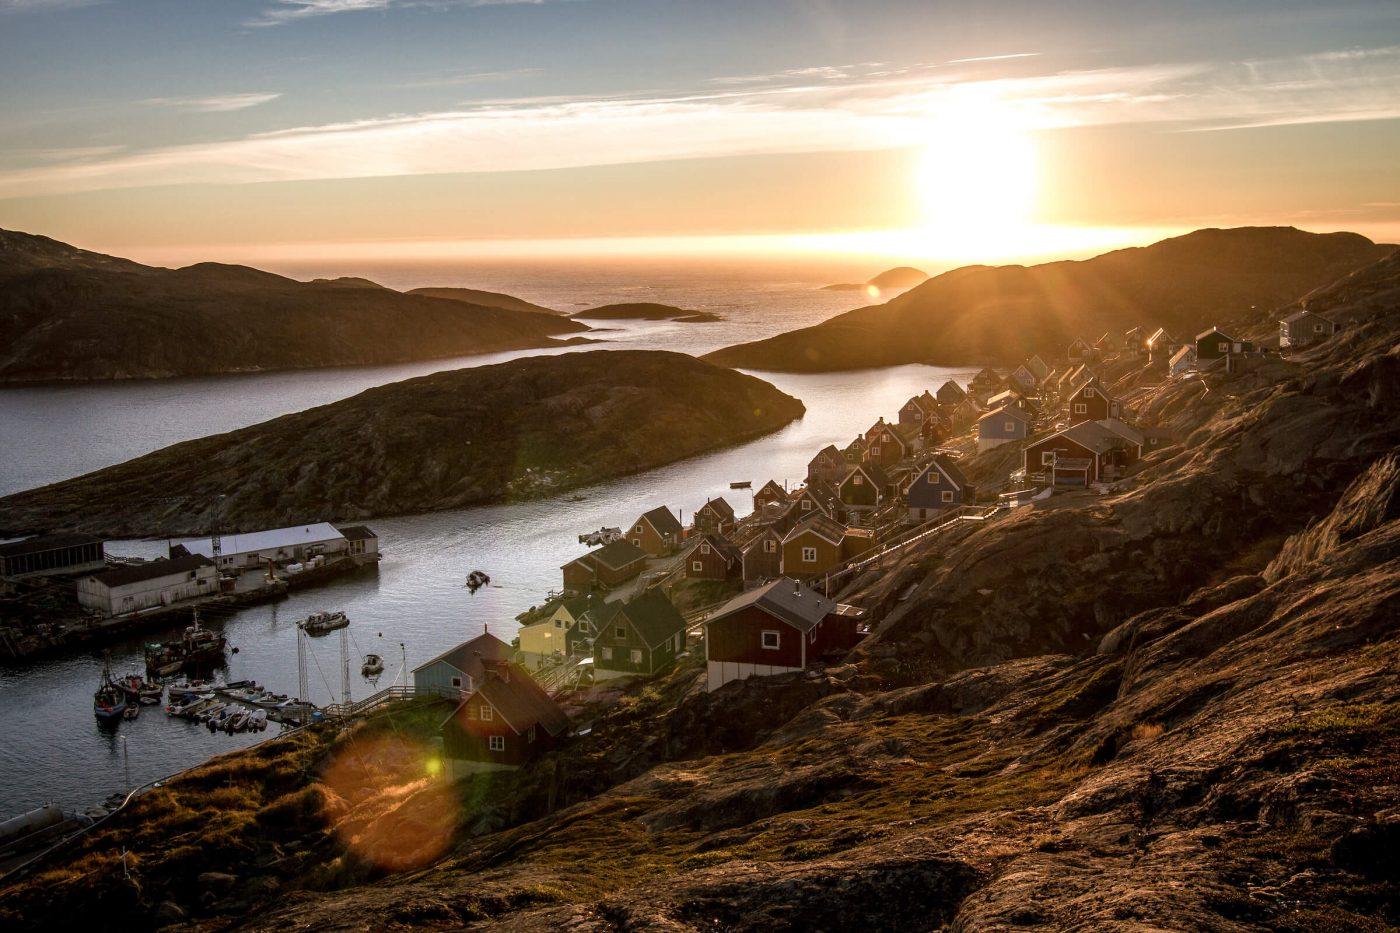 Kangaamiut in Greenland at sunset. Photo by Mads Pihl 2